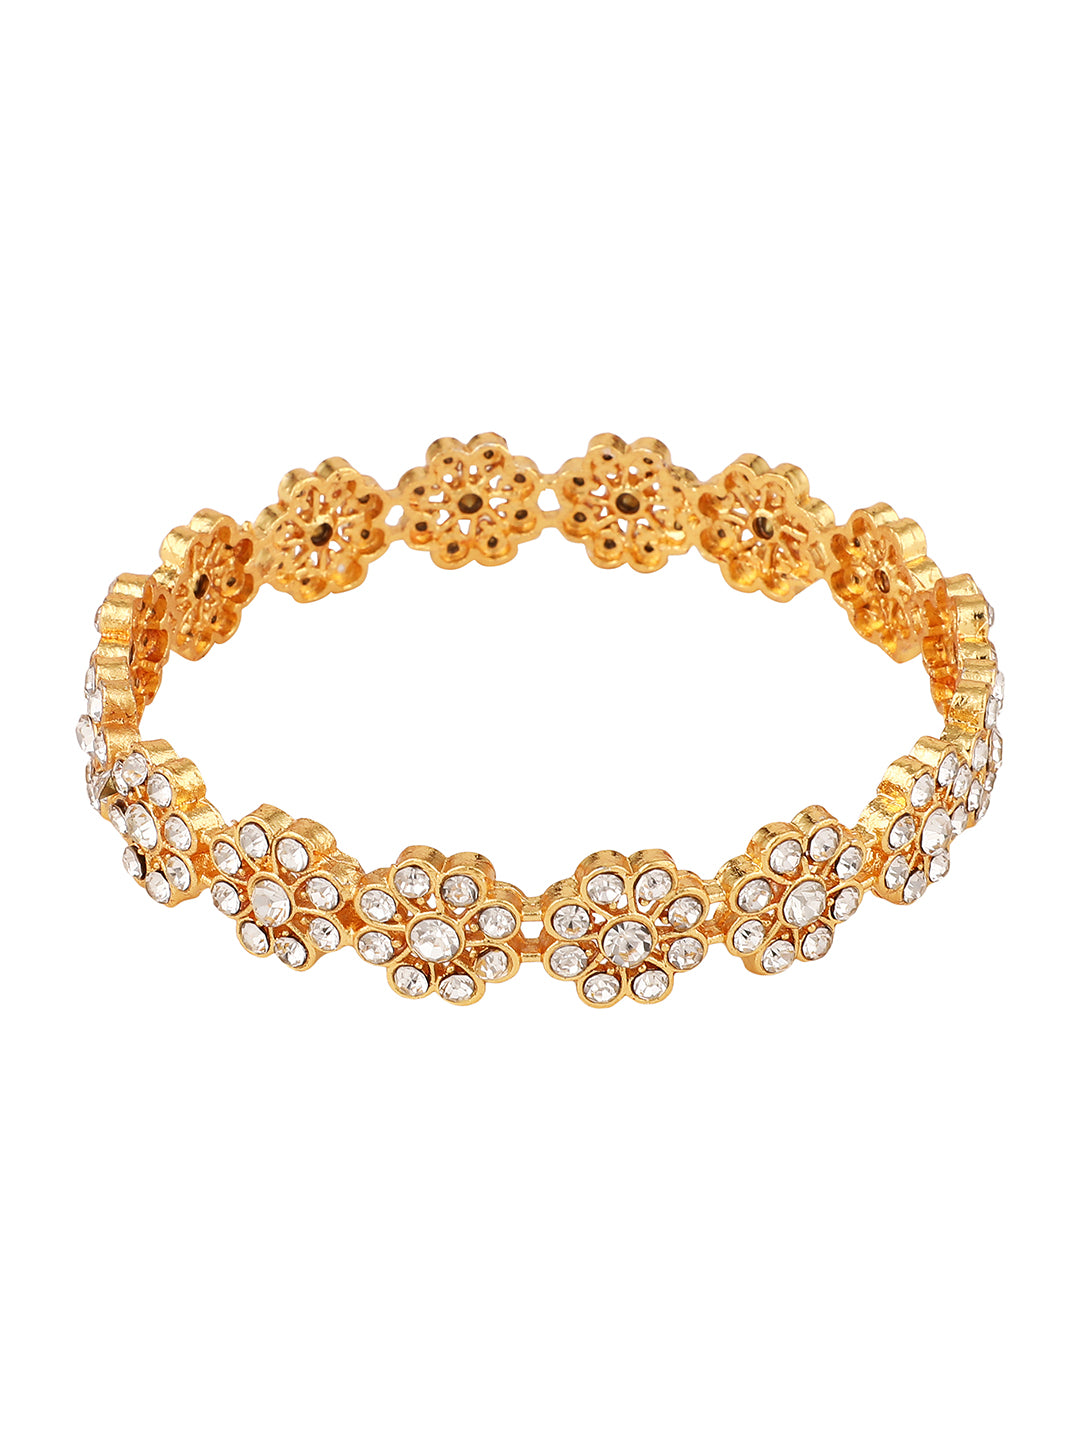 Women's/Girls Statement Gold Plated Floral Shaped Stone Studded Bangle Set Of 2 - Mode Mania